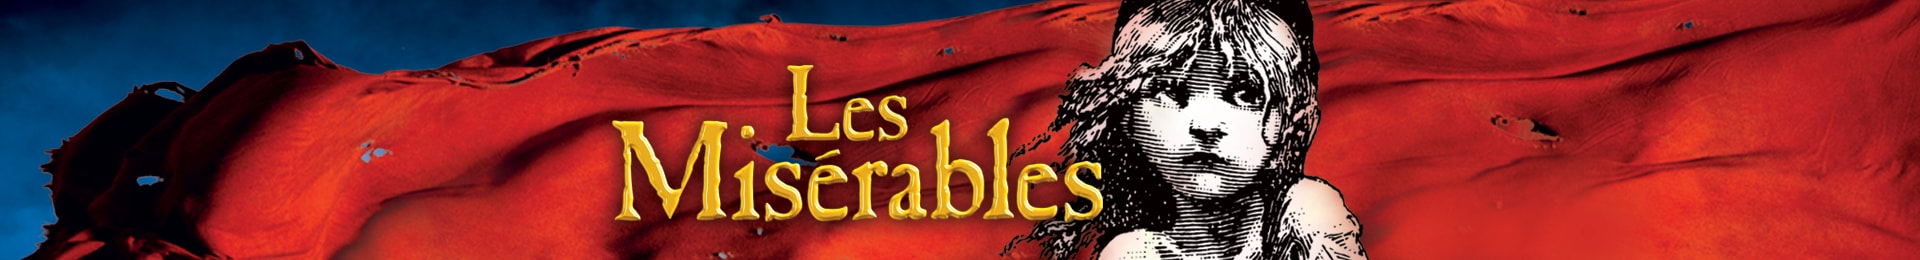 Les Miserables & Dinner at Jamies Italian - Piccadilly banner image